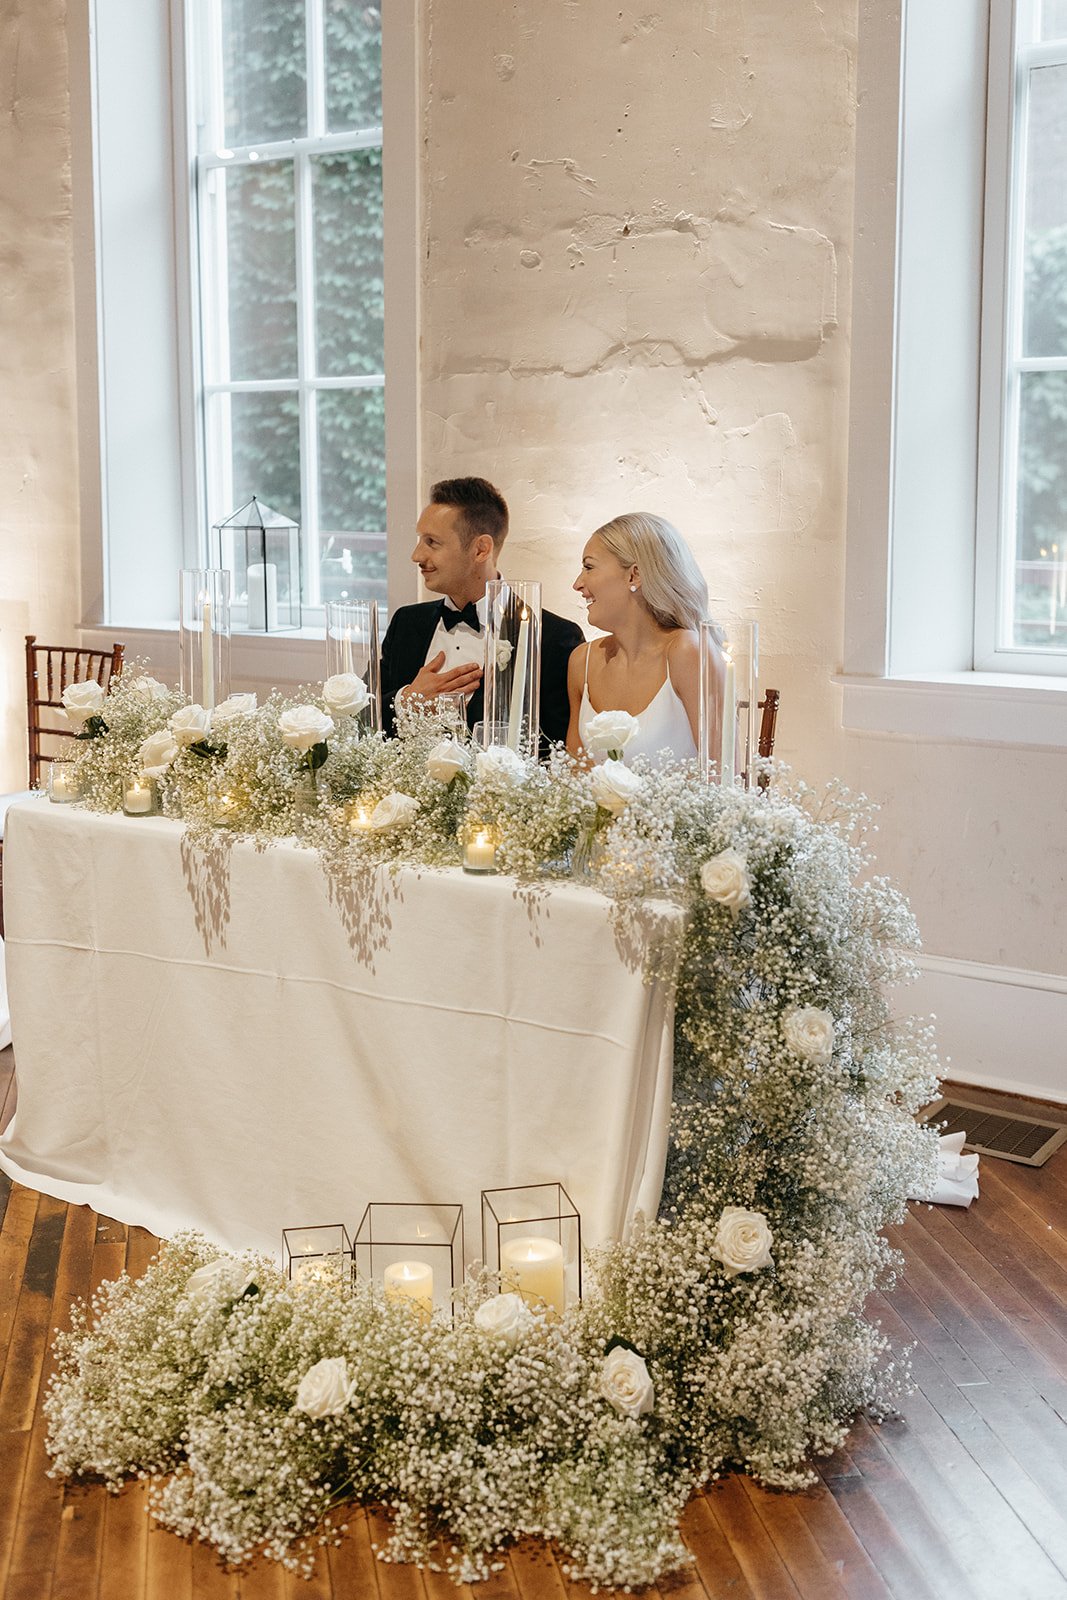 Couple sitting at table with large bouquets of baby's breath and candles